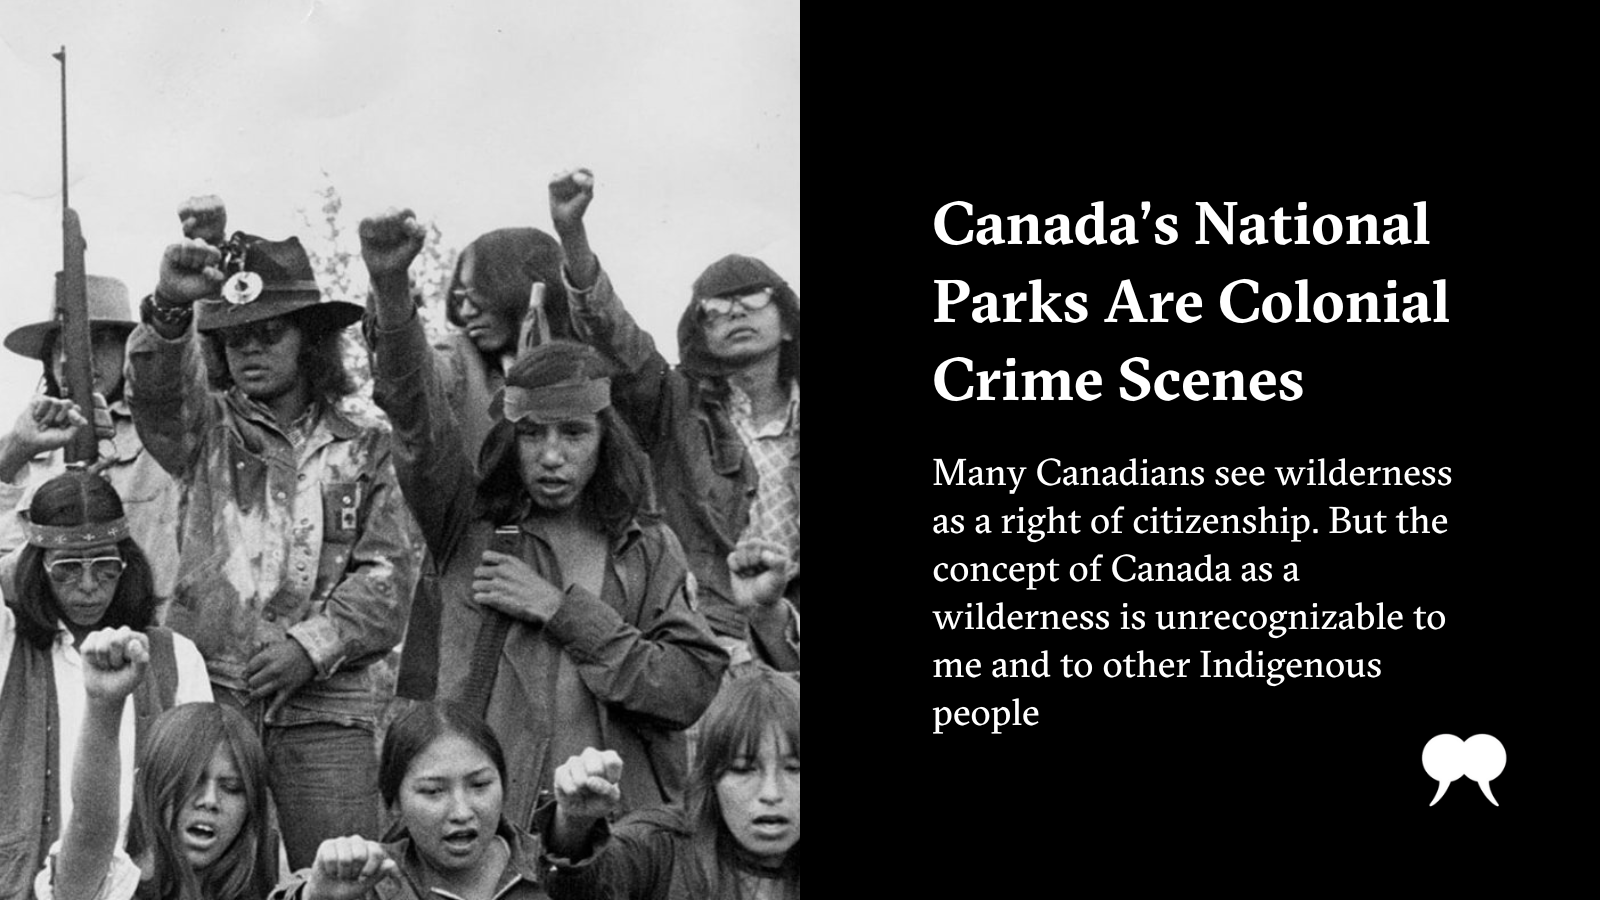 Canada's National Parks Are Colonial Crime Scenes